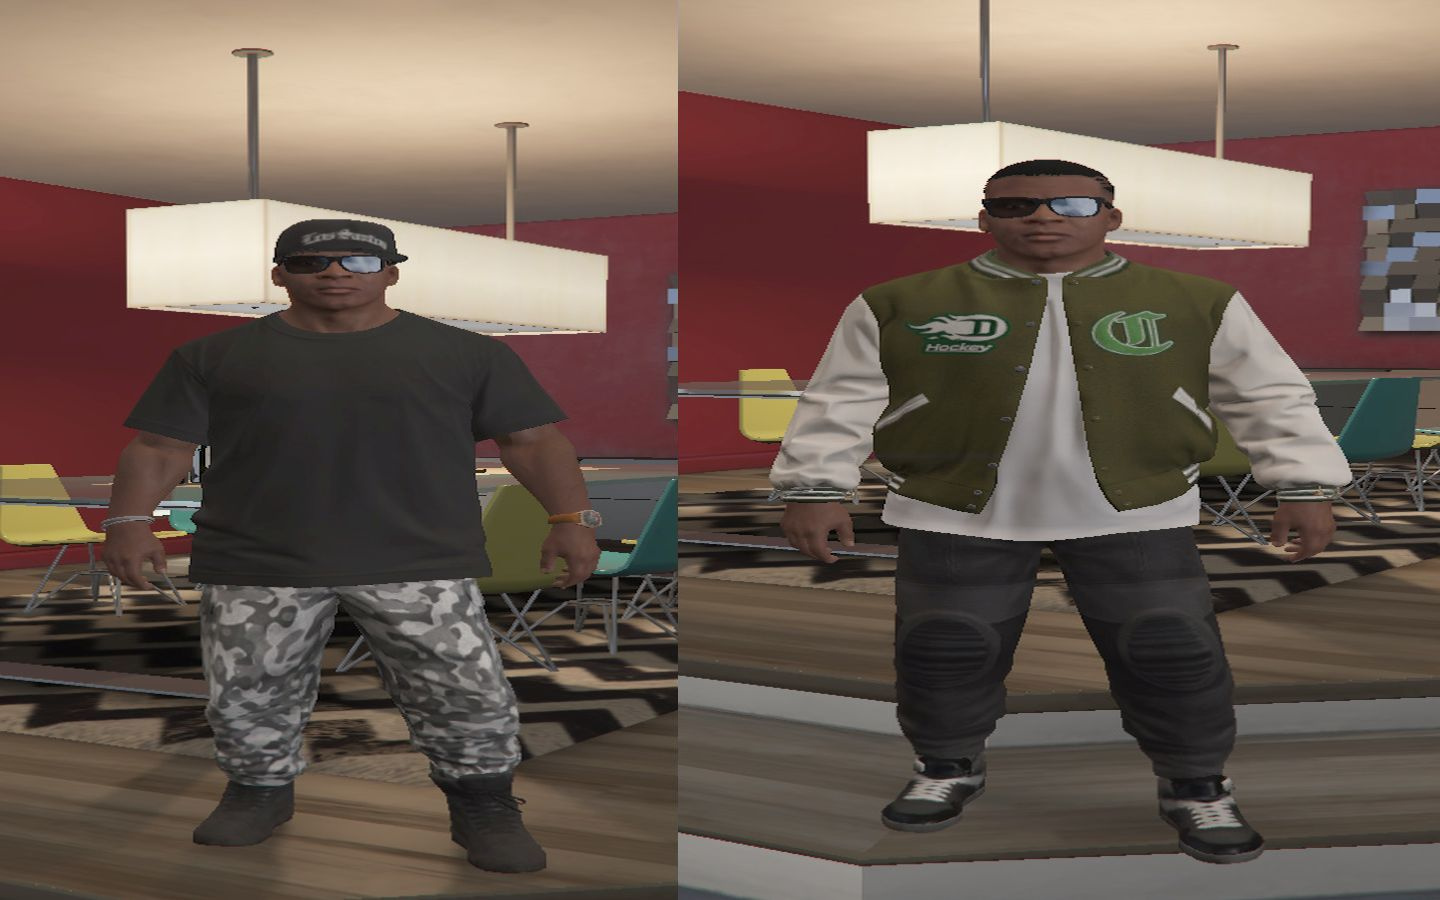 Merryweather gta 5 outfit фото 50